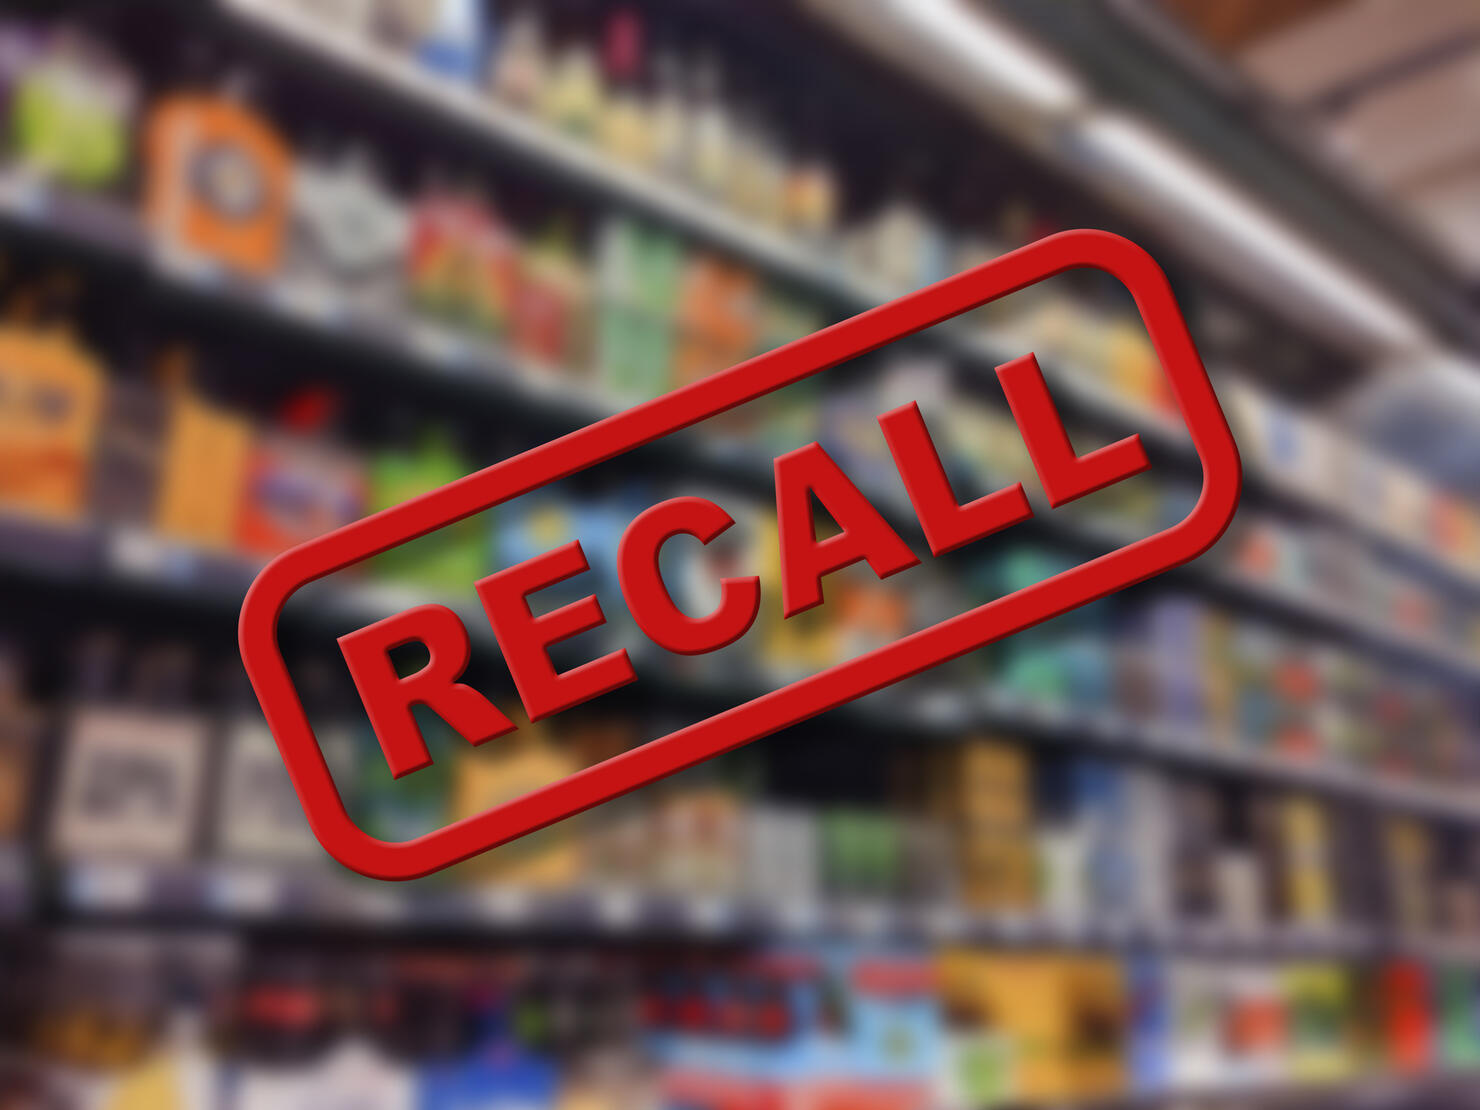 Recalled Candy Sold In Minnesota Poses Major Health Risk, Fatal